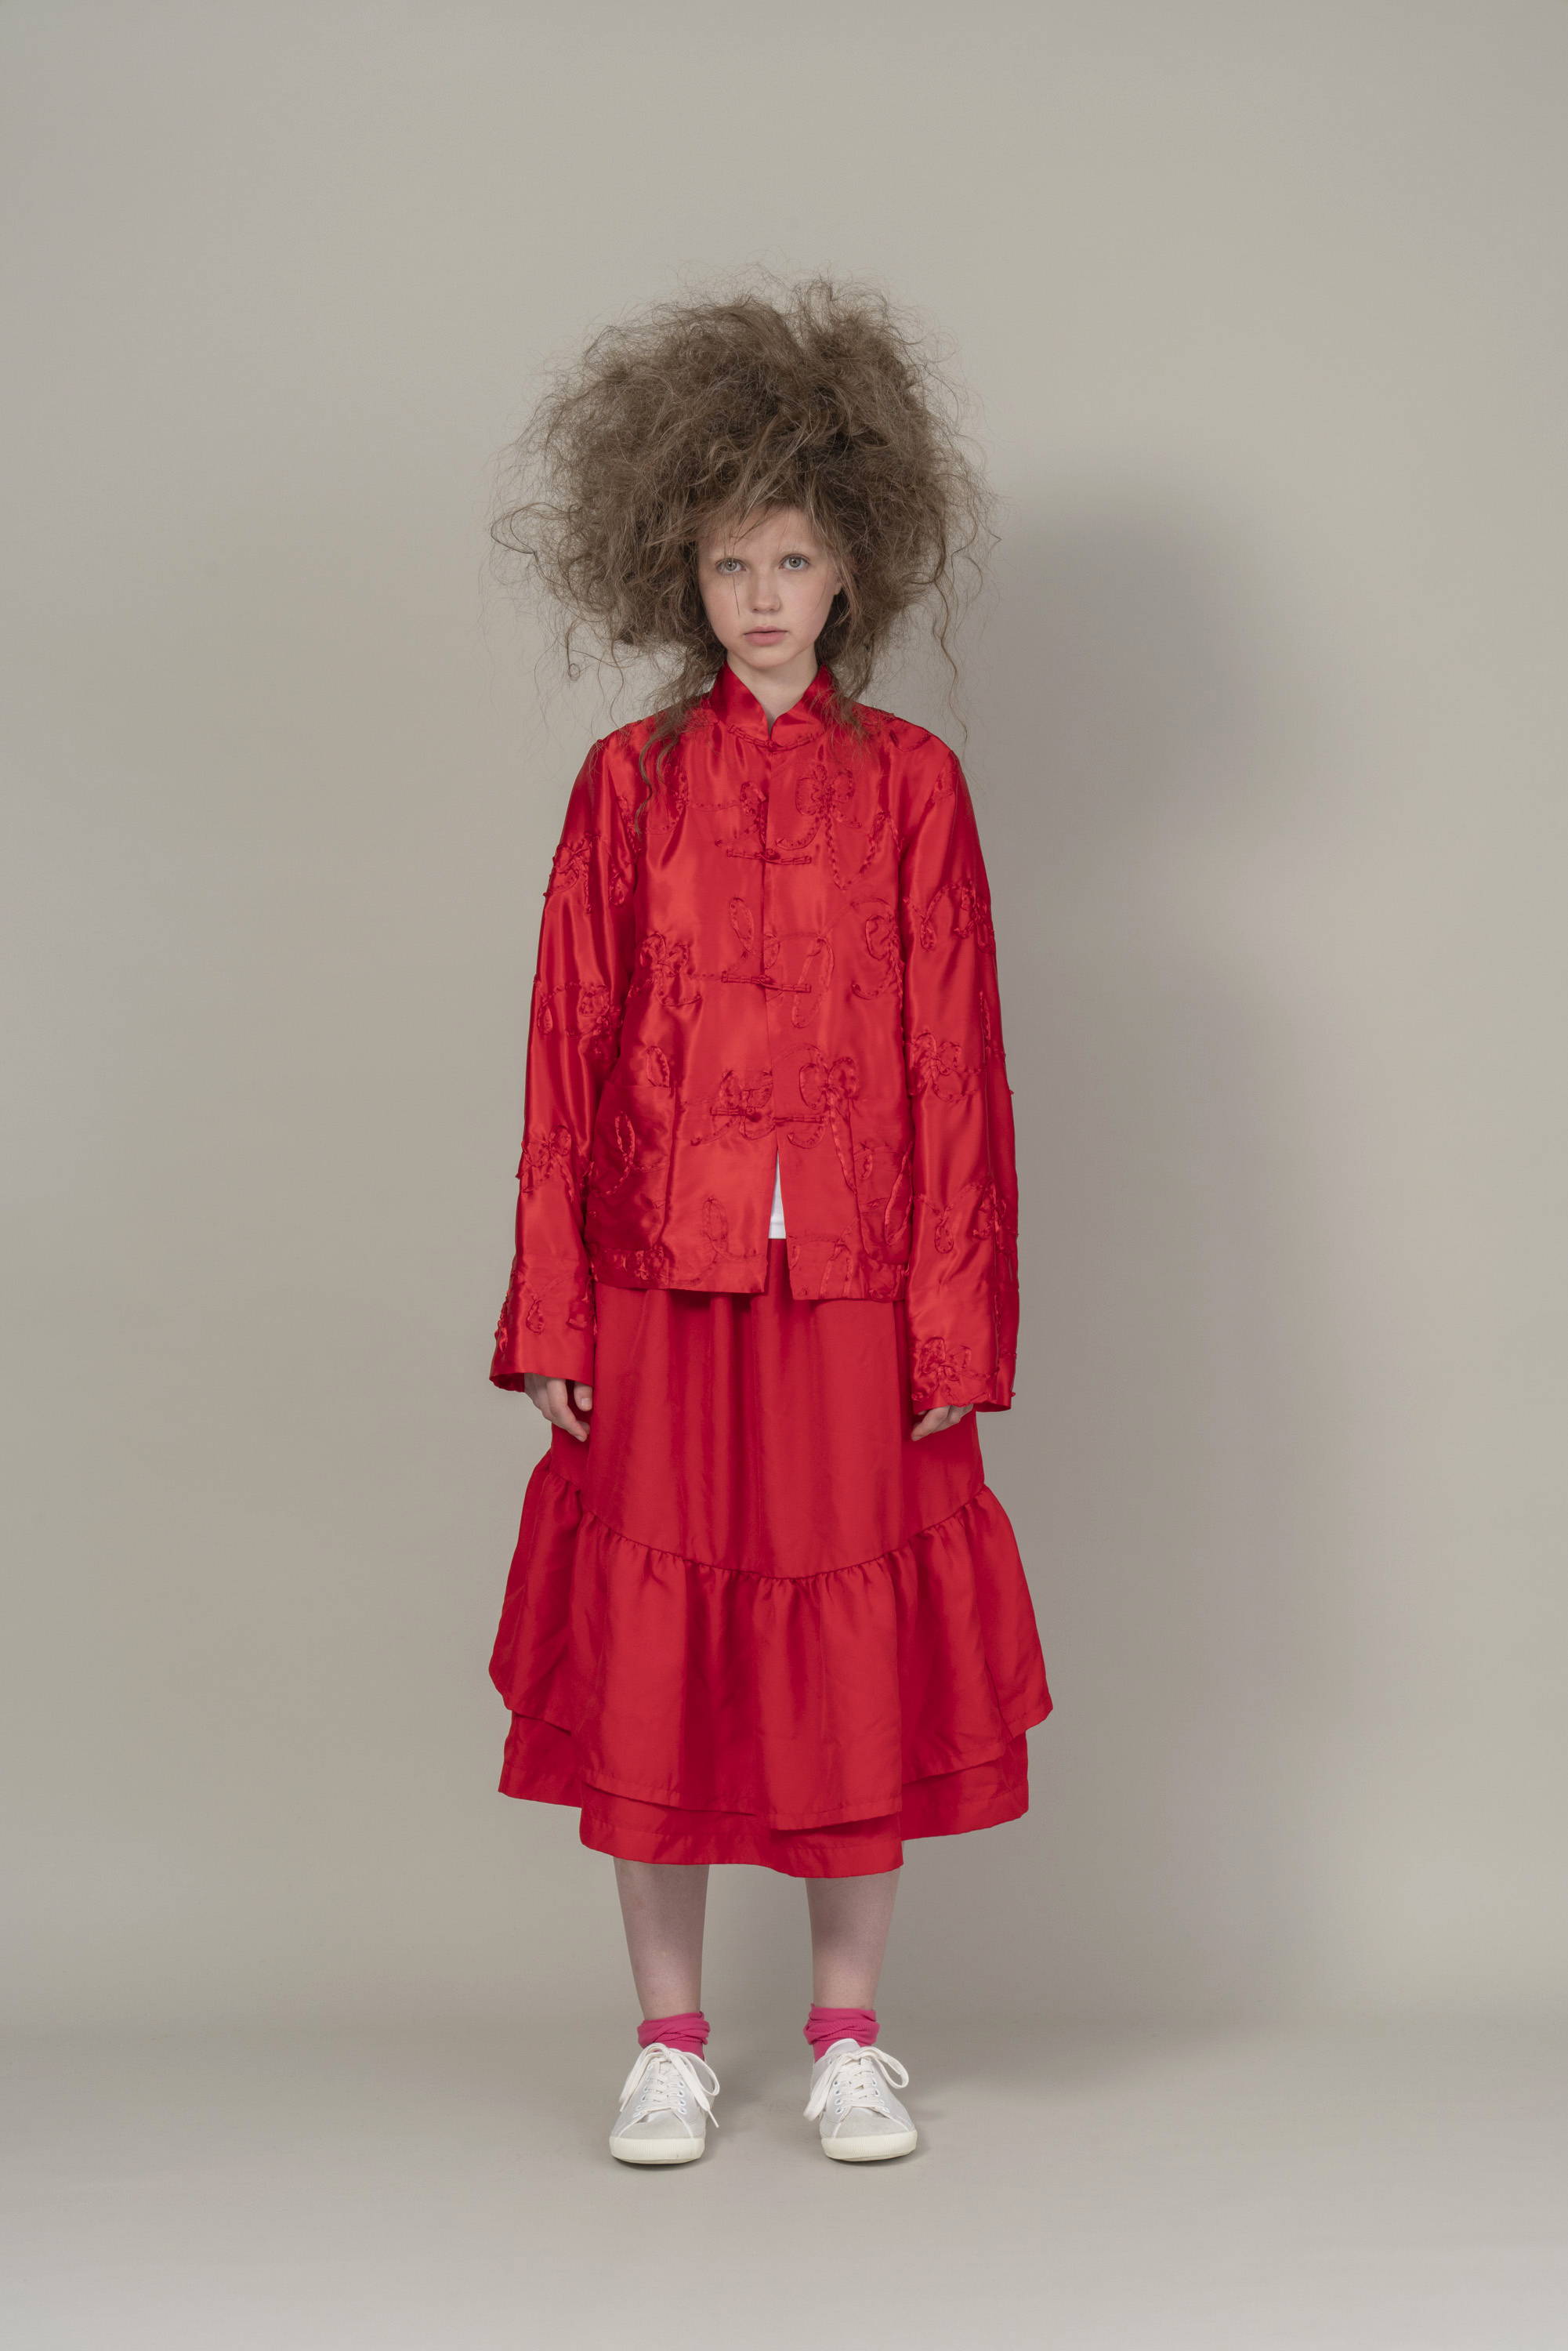 Founded in 2015, Comme des Garçons GIRL is a womenswear diffusion line ...